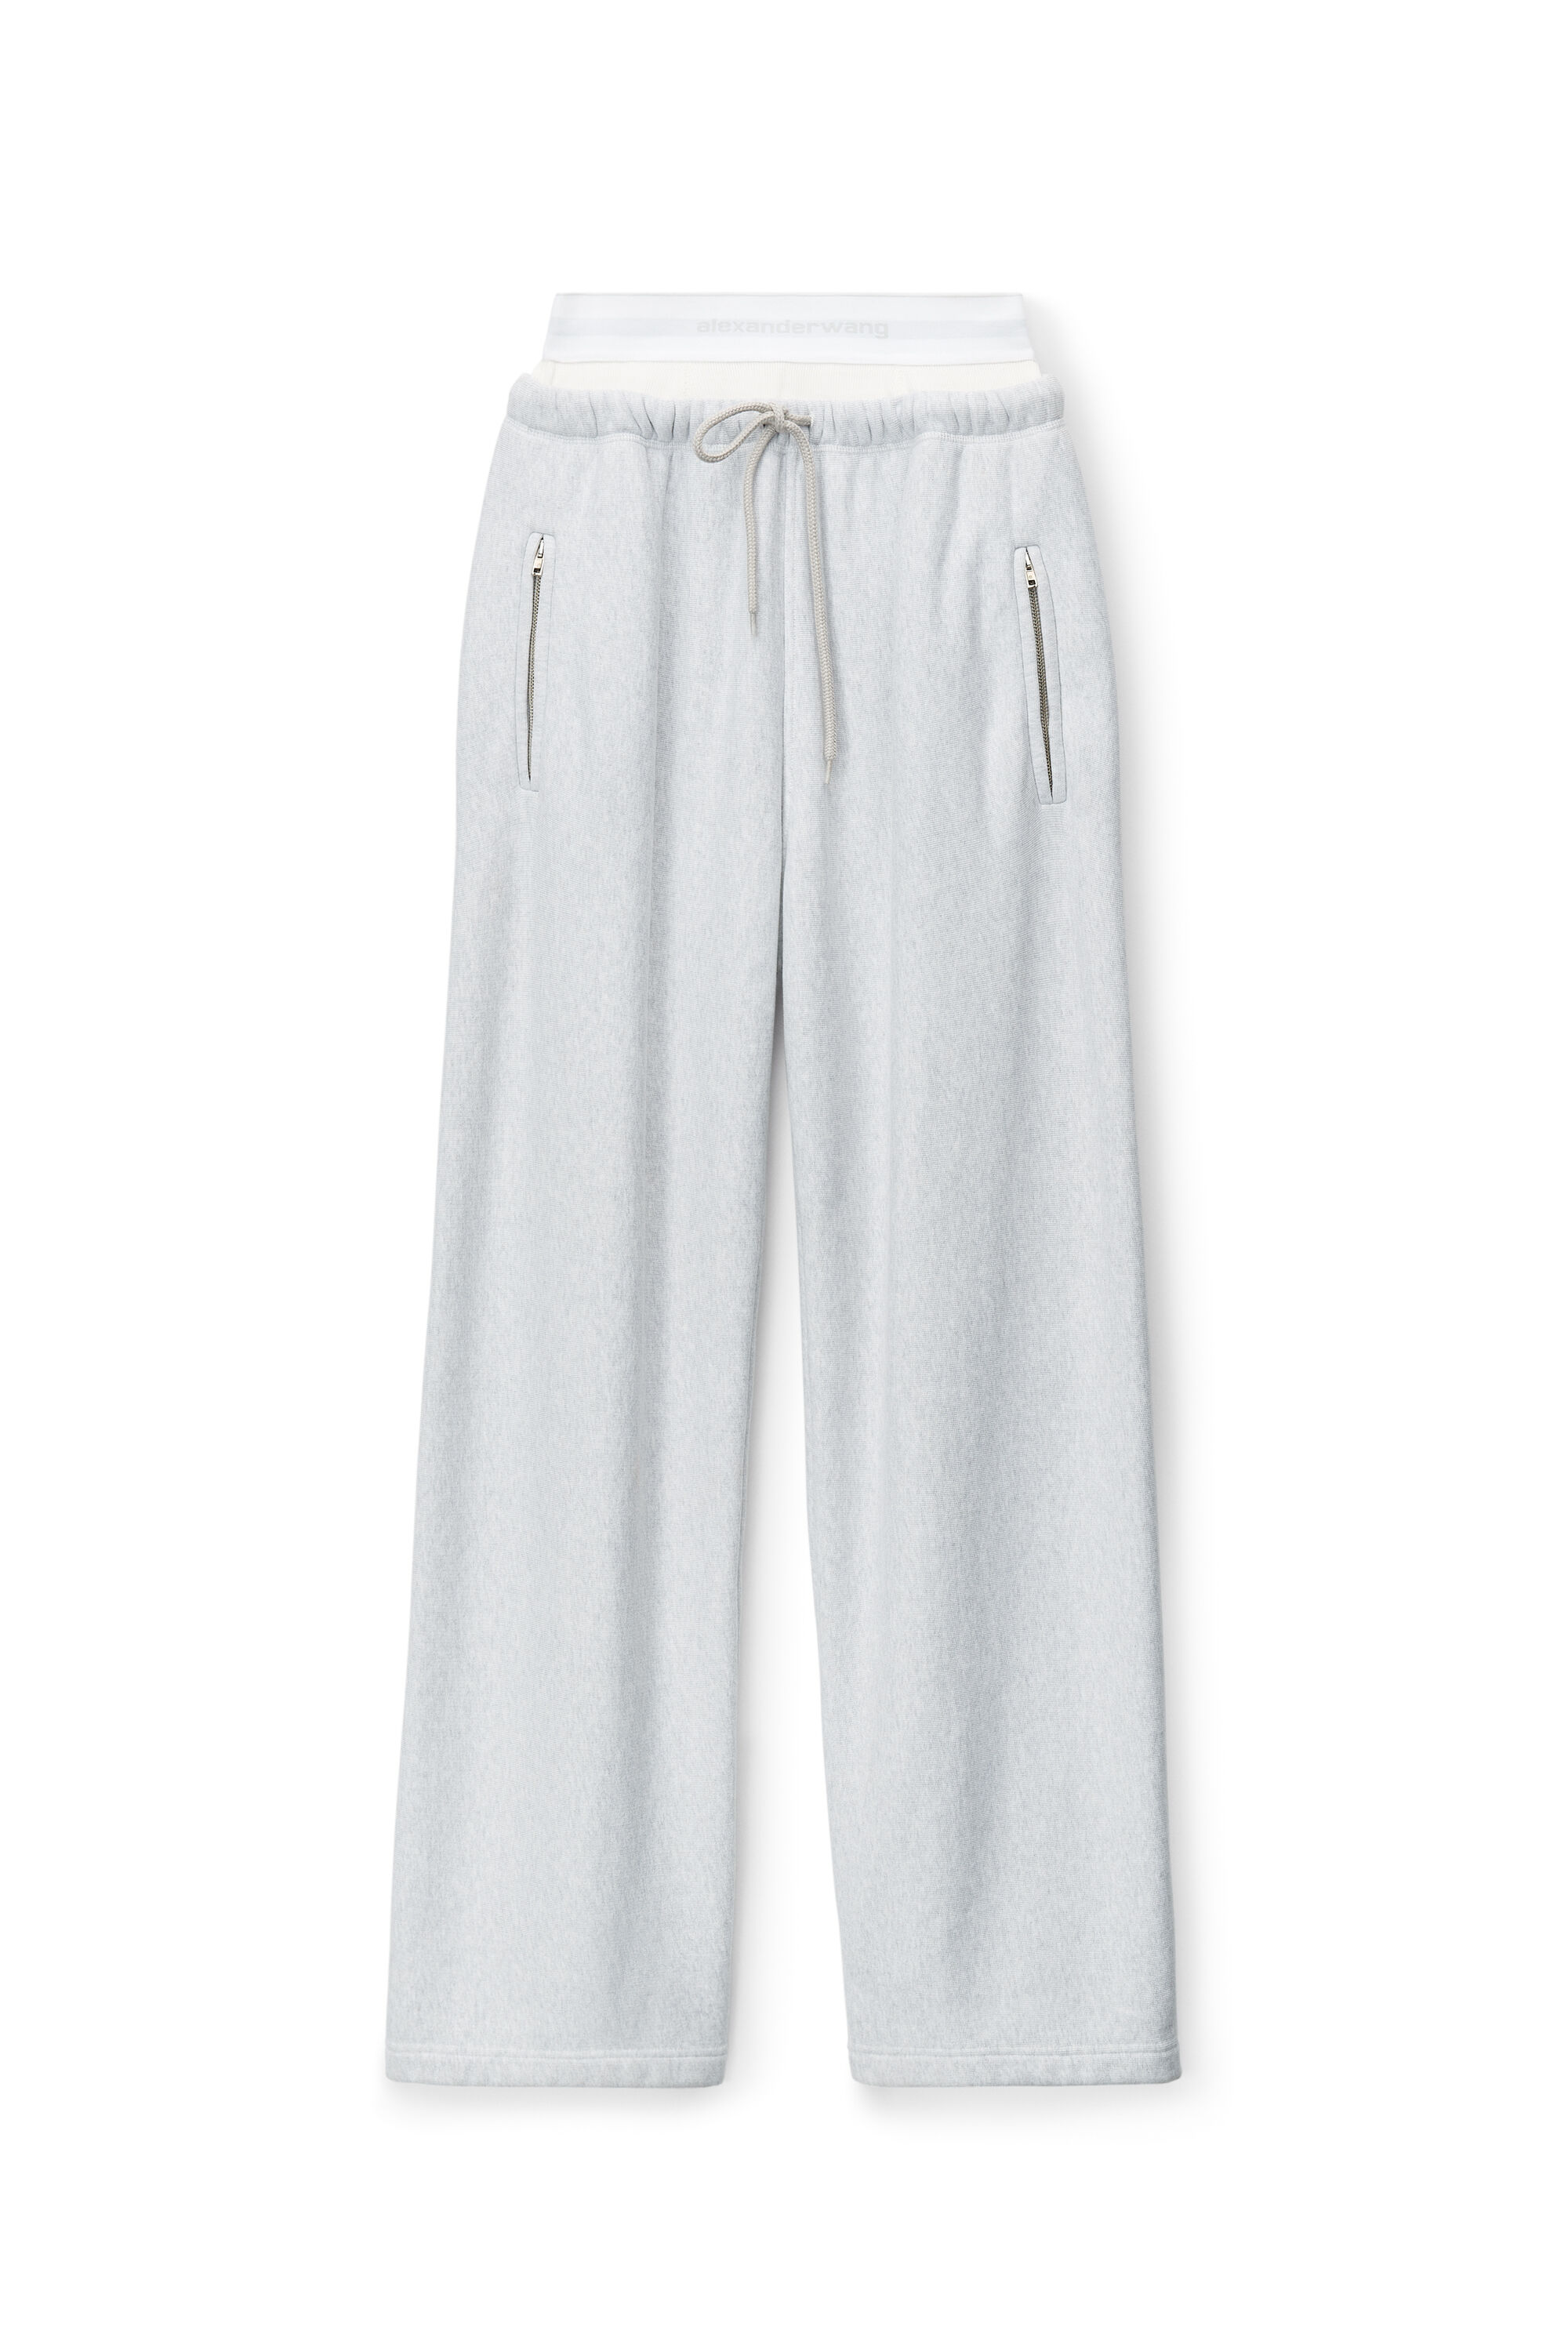 wide leg sweatpants with pre-styled logo brief waistband in LIGHT 